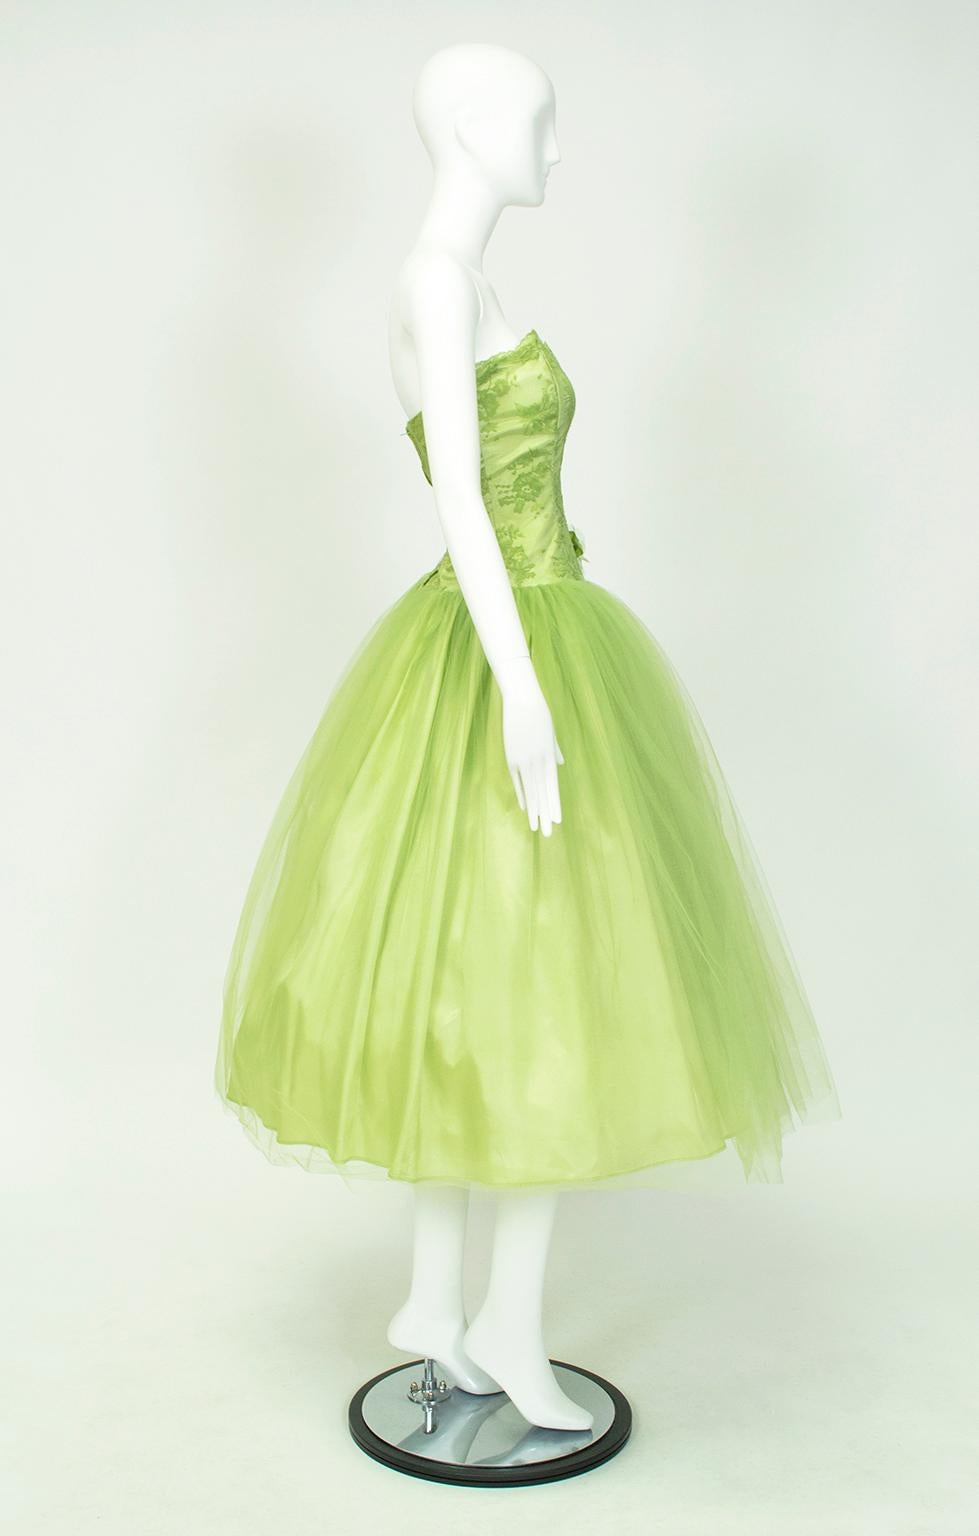 Ideally suited for a gal with a long waist, this zinger of a party dress “poufs” abruptly where the skirt meets the bodice for a dramatic tabletop skirt effect. Endless yards of tulle make the dress look like lime cotton candy.

Strapless prom dress